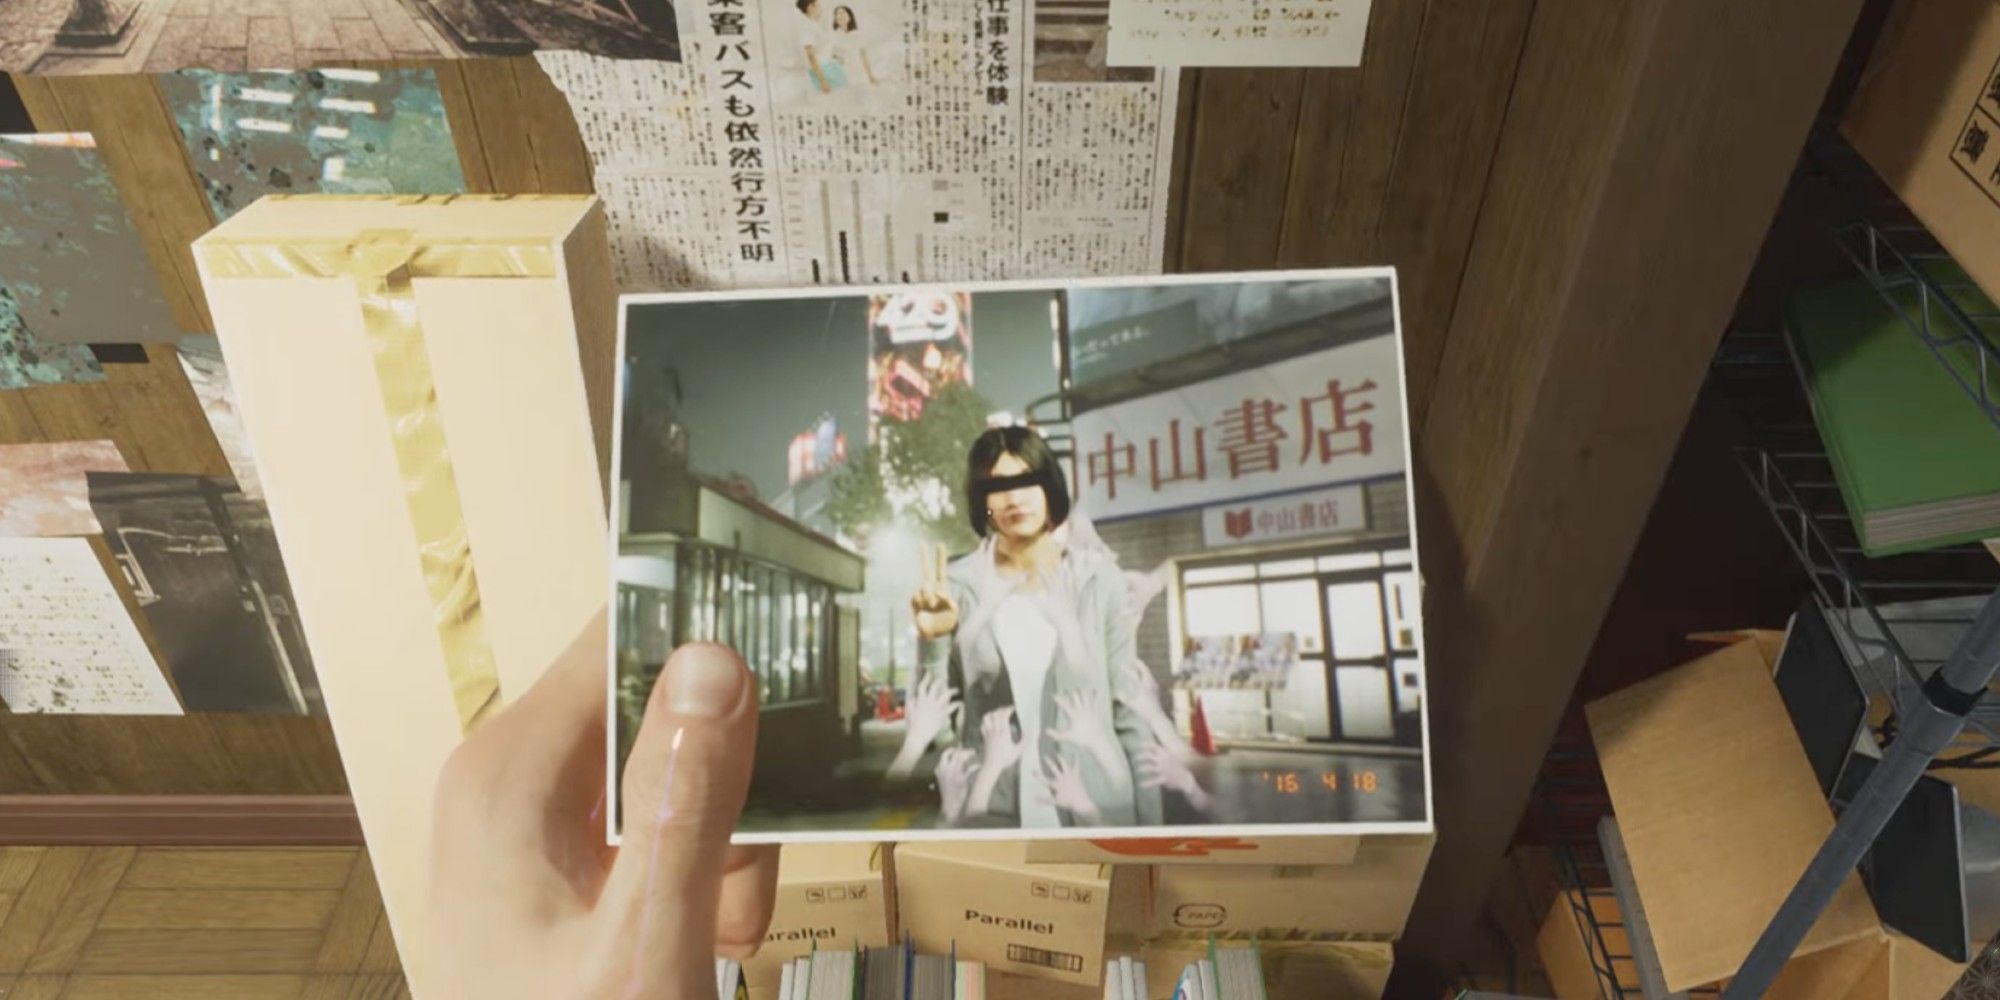 Akito holds a cursed picture in his hand